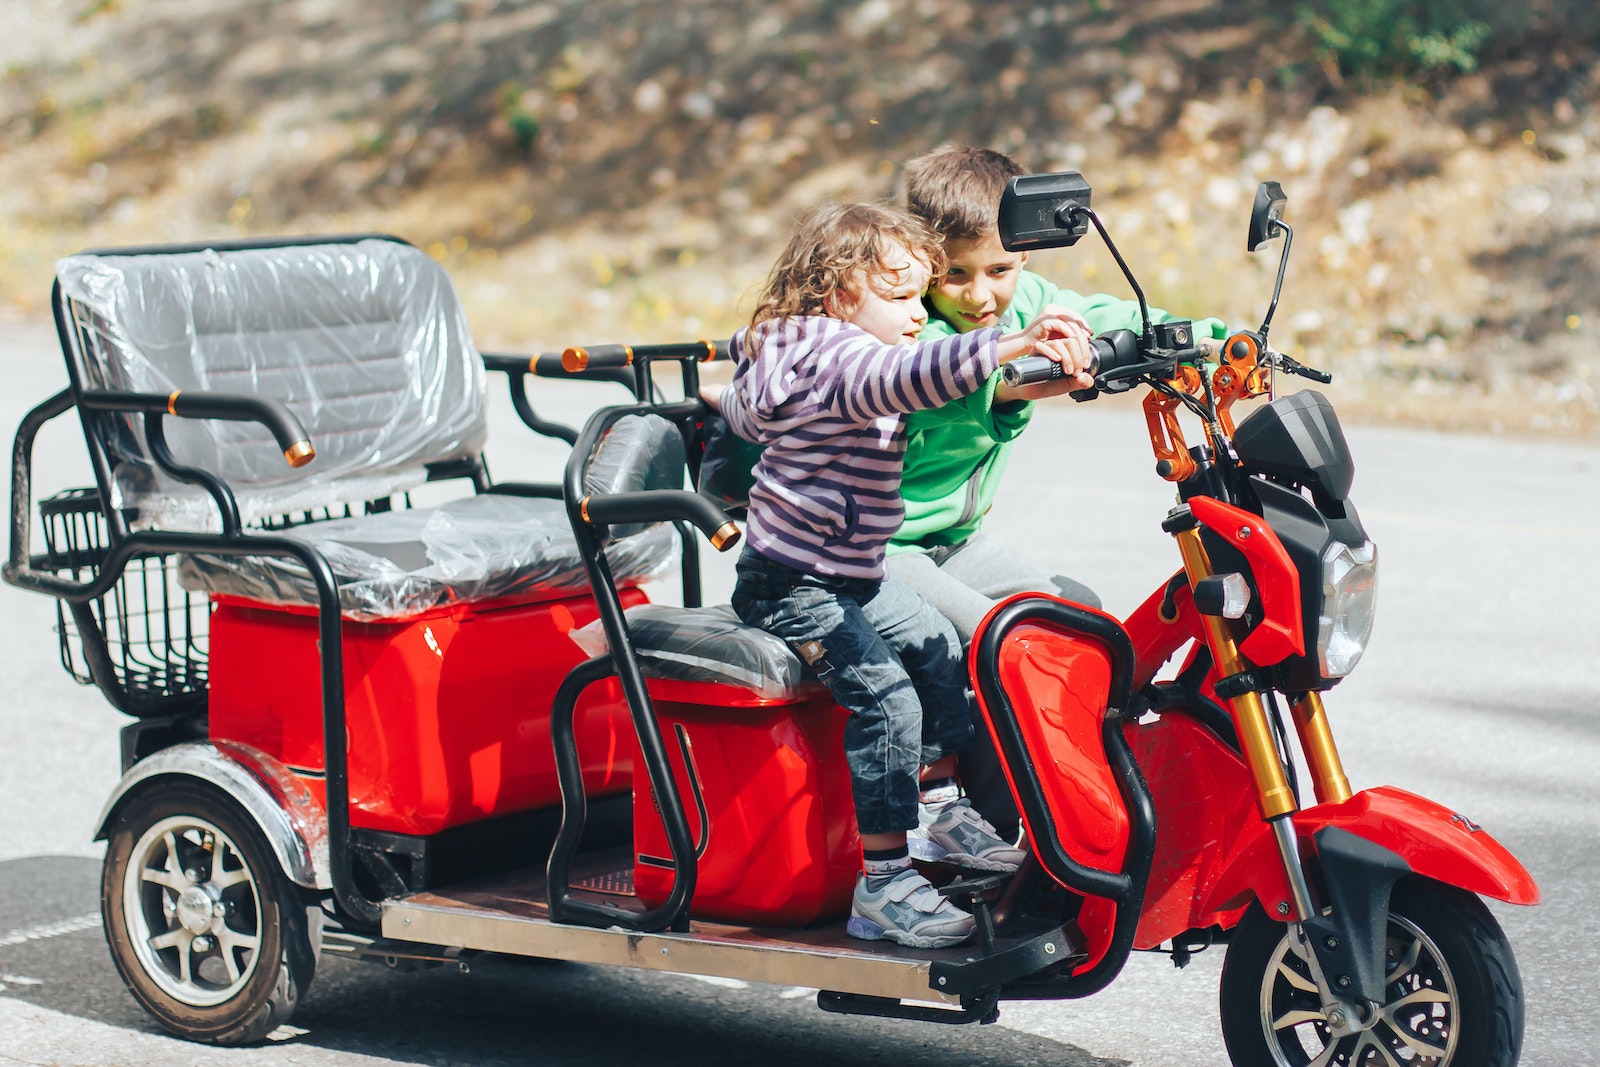 Adorable child helping little brother to ride modern red trike motorcycle on asphalt road on sunny day